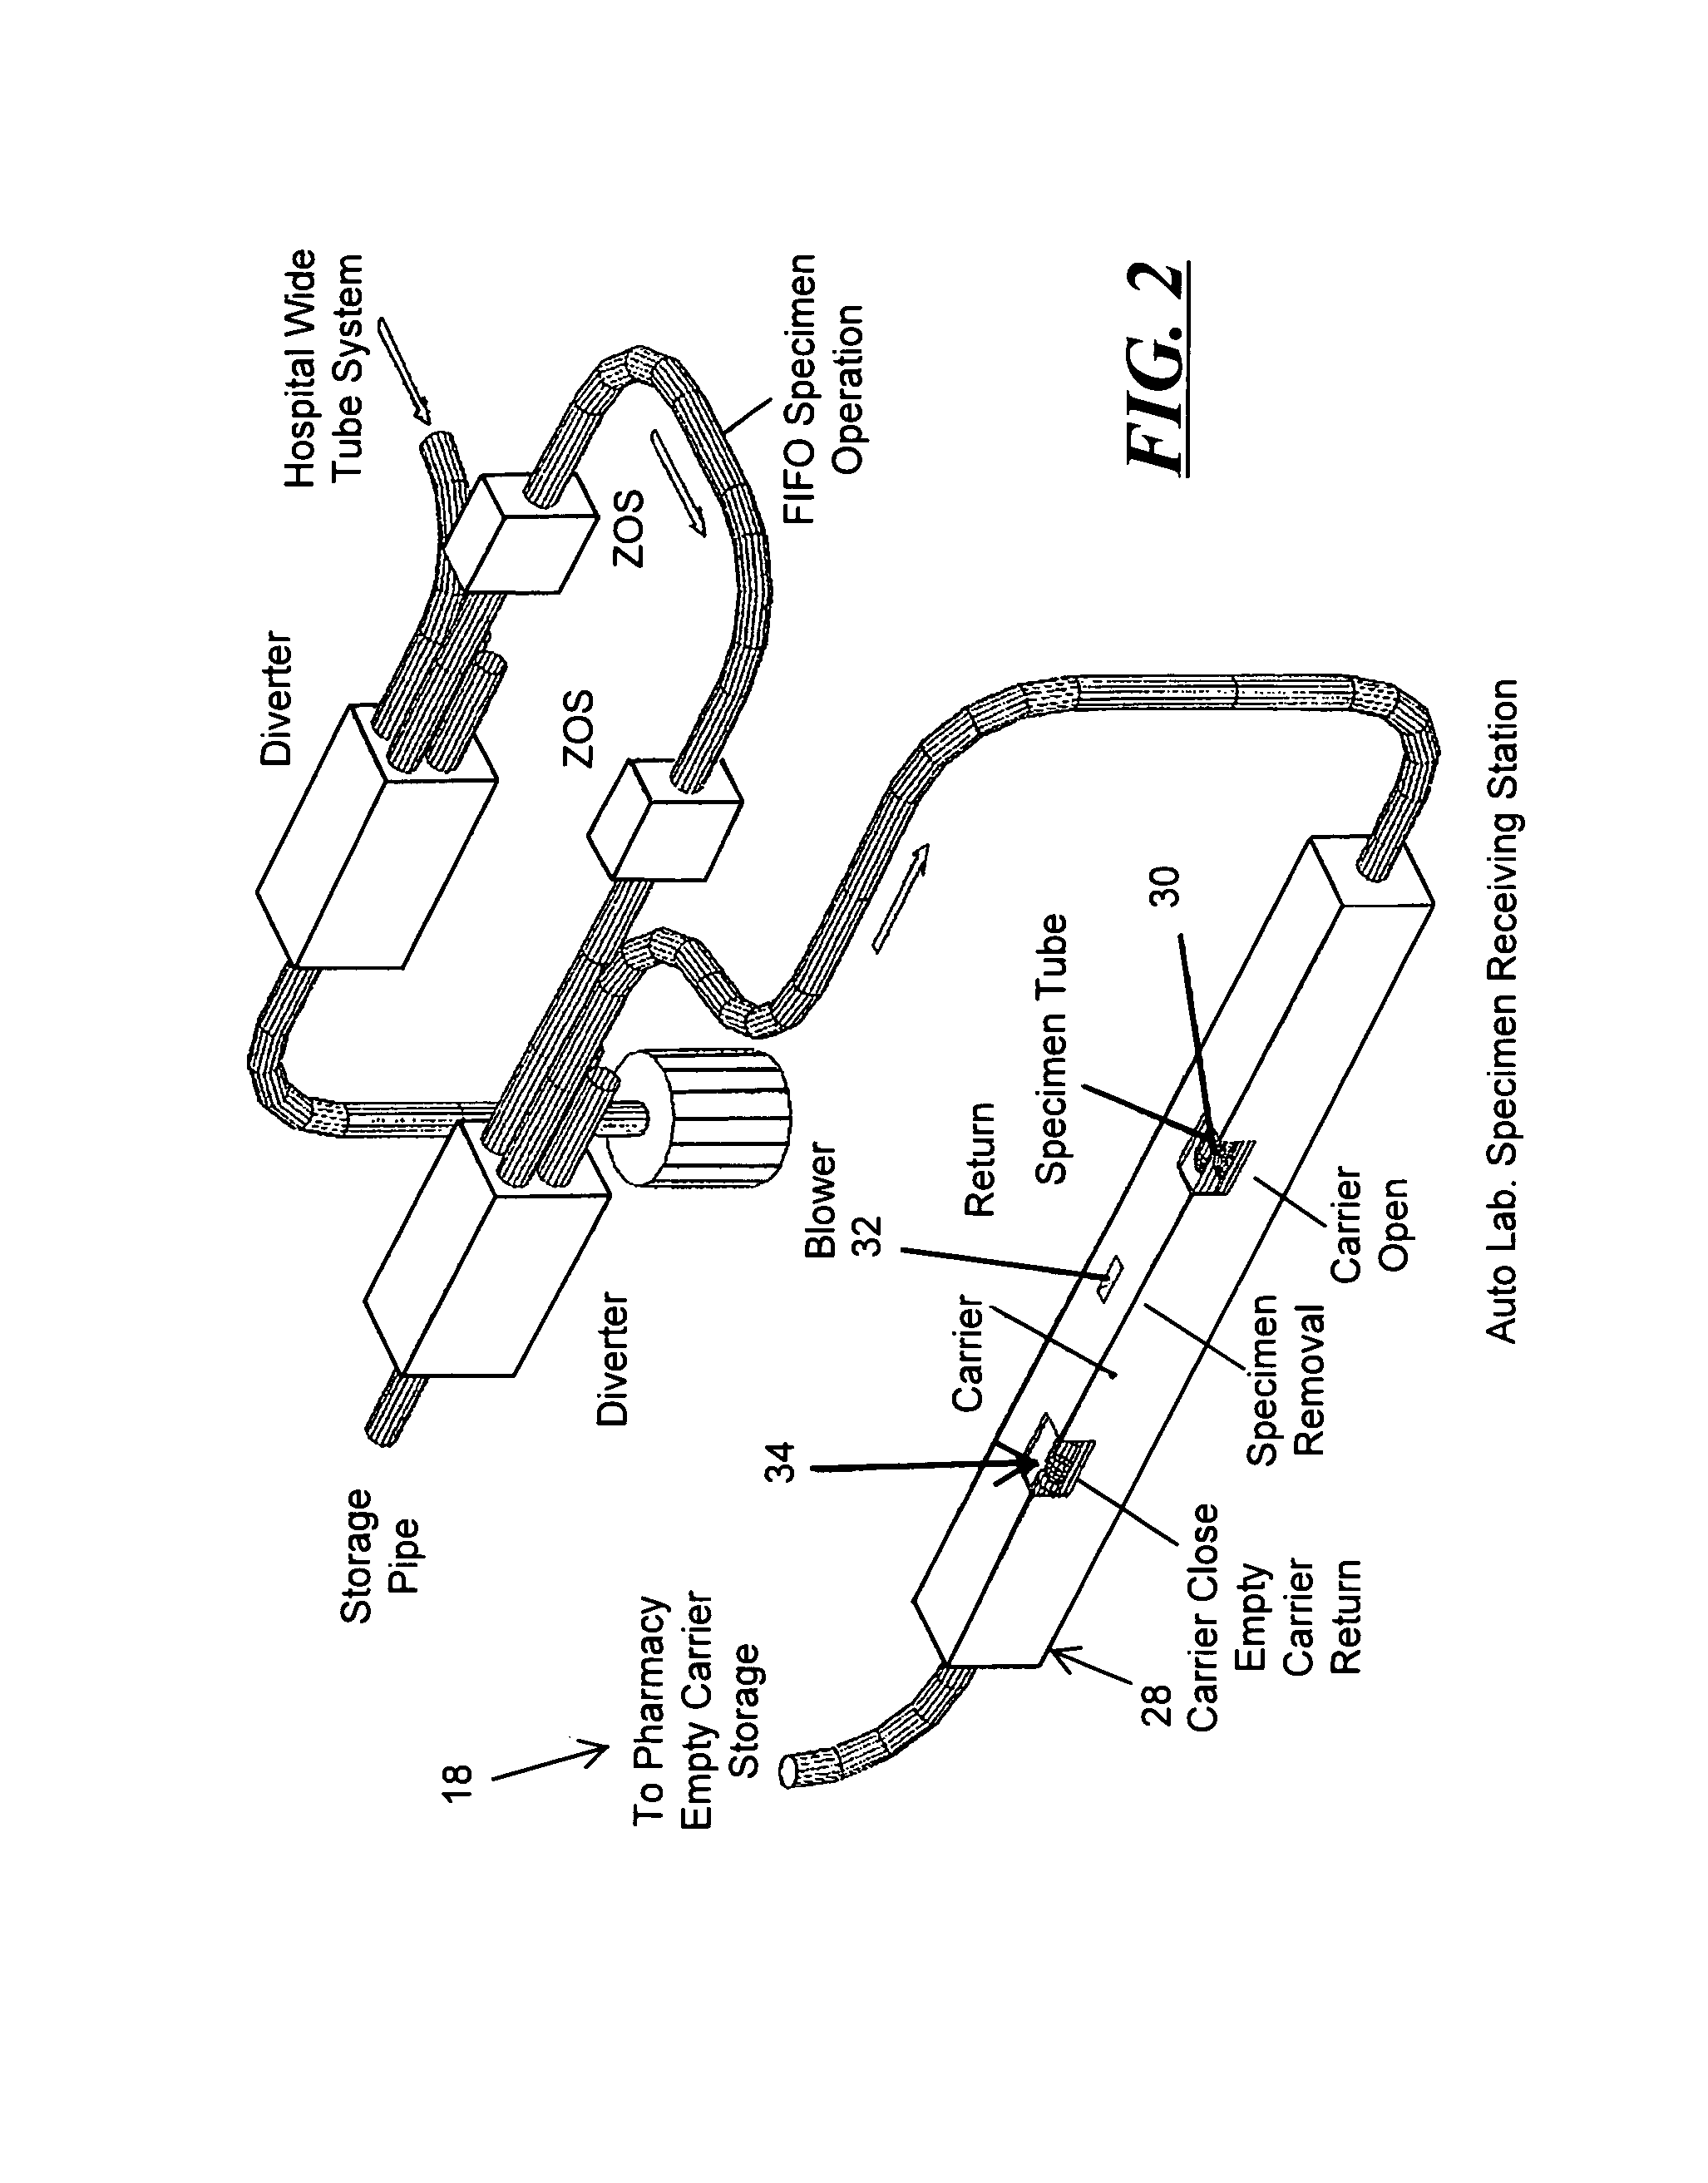 Automatic empty carrier storage, retrieval and distribution system